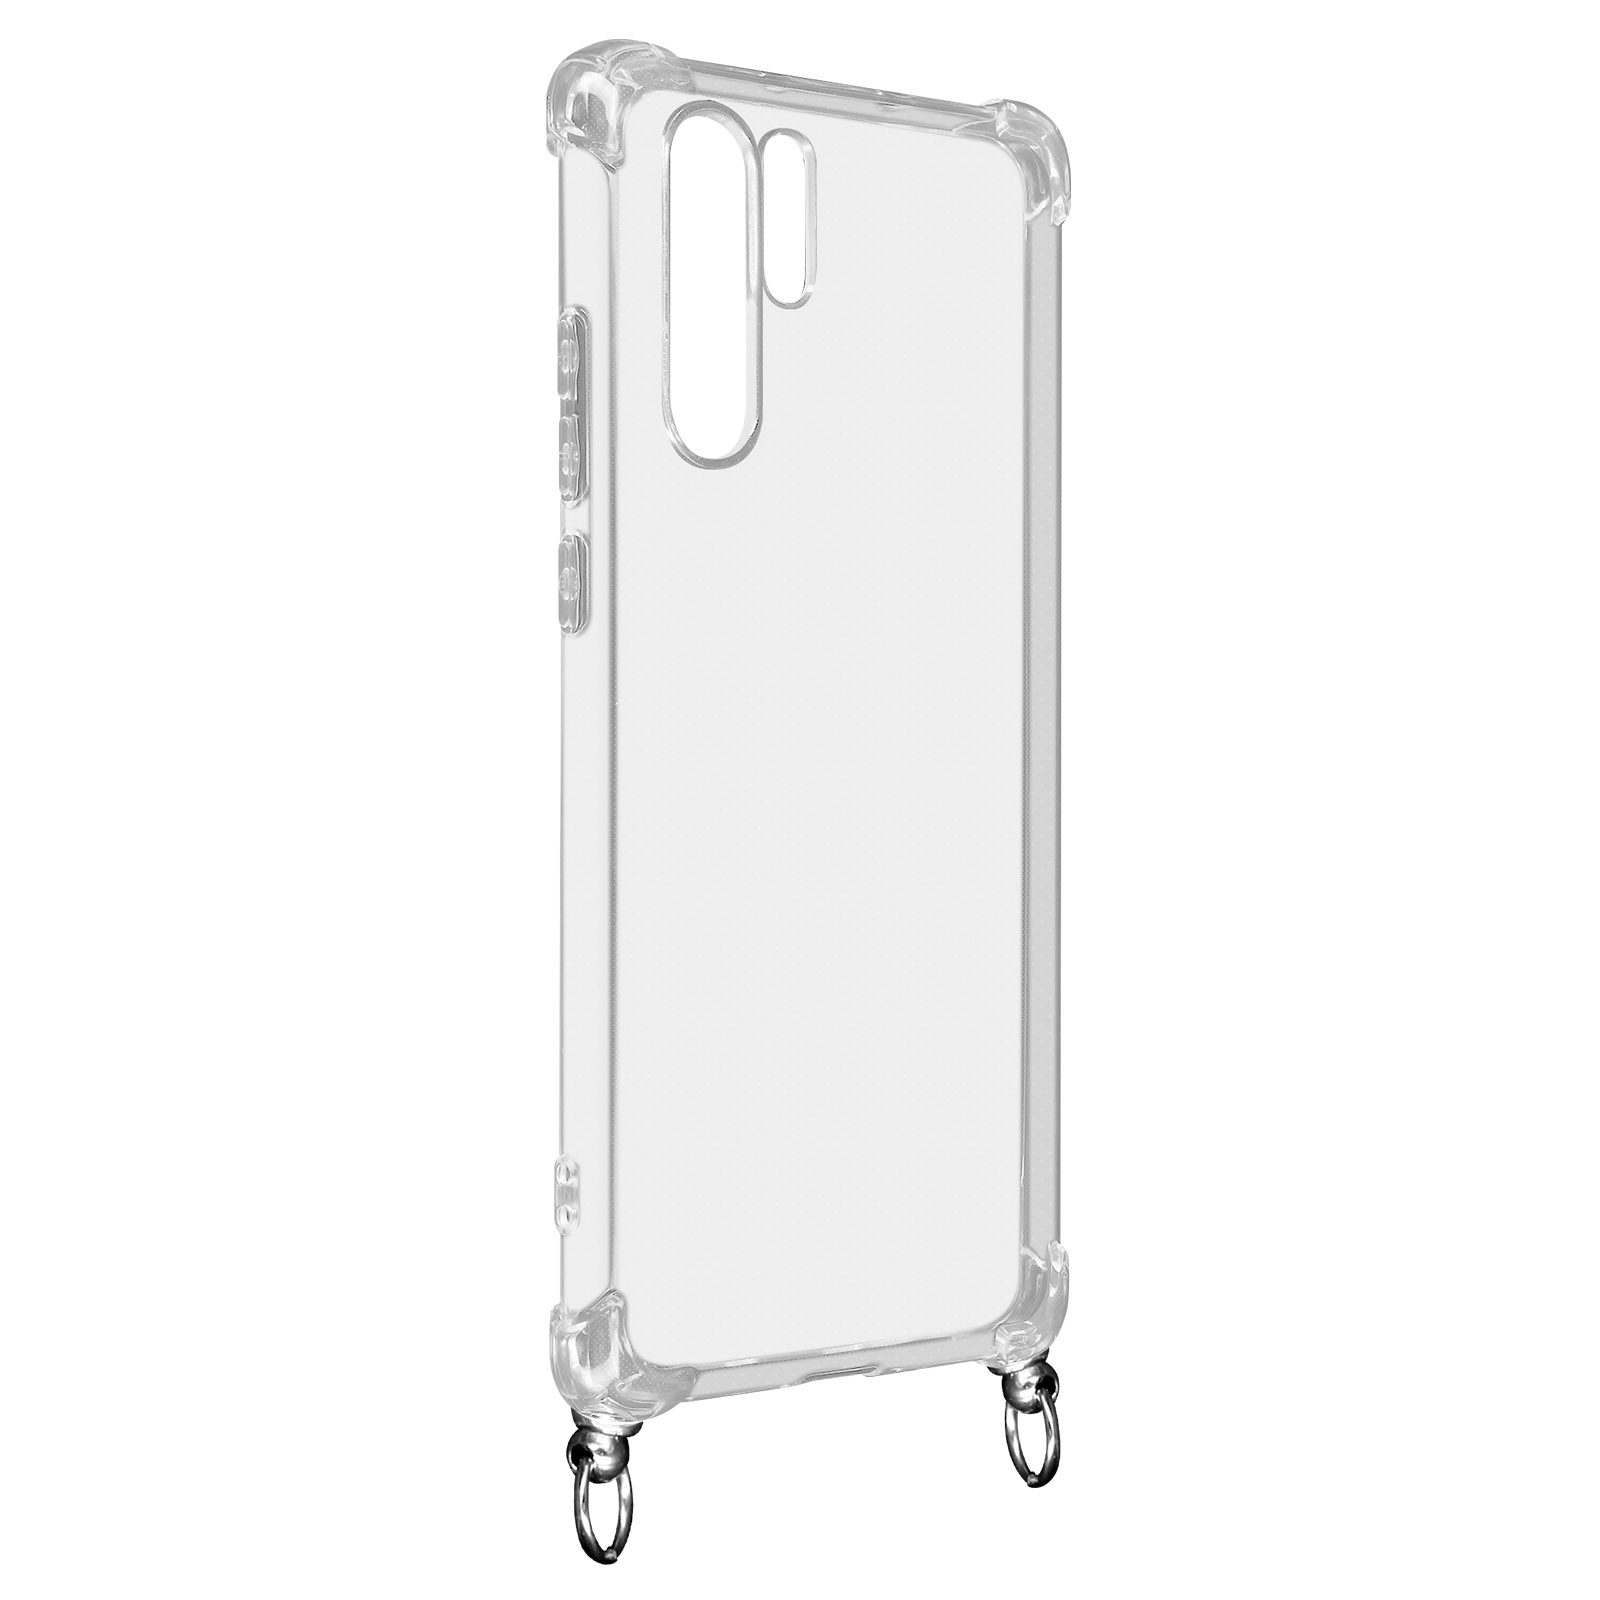 Pro, Series, Rings Backcover, P30 Huawei, Transparent AVIZAR